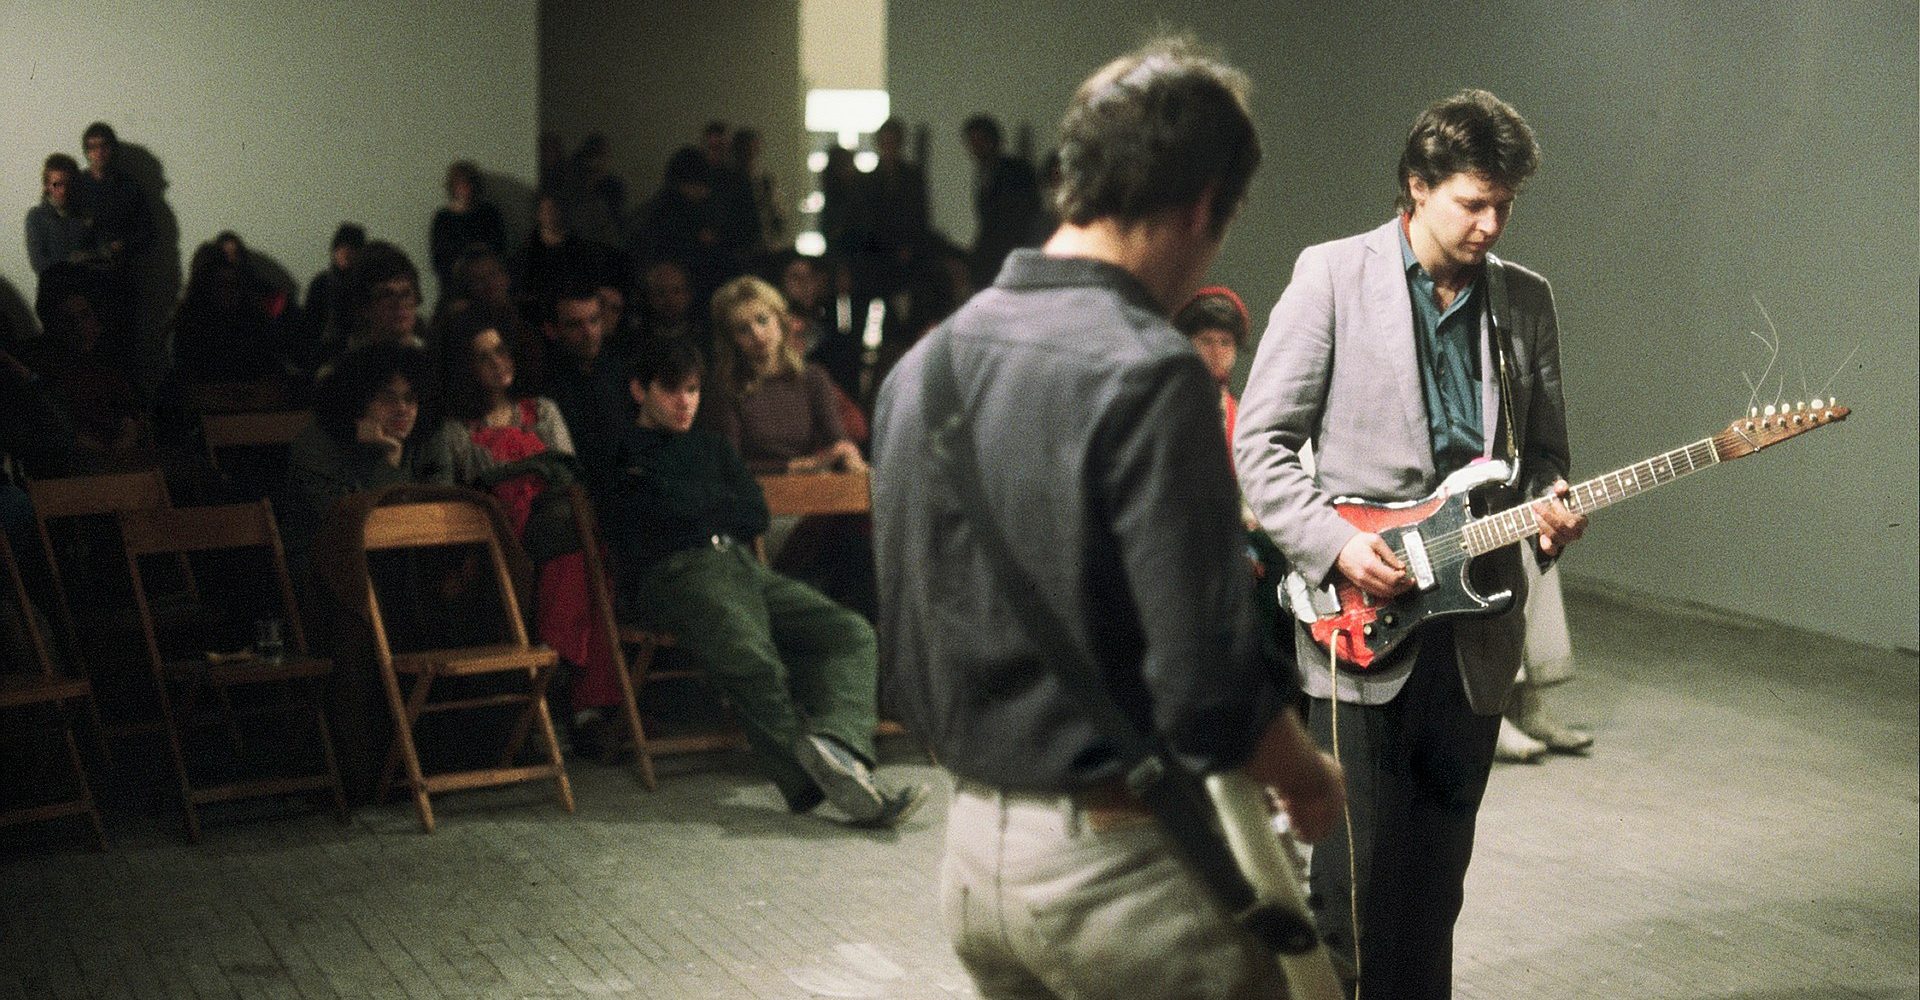 Glenn Branca performing at Hallwalls in the 1980s. Image courtesy of Hallwalls’ archive. Wikimedia Commons.